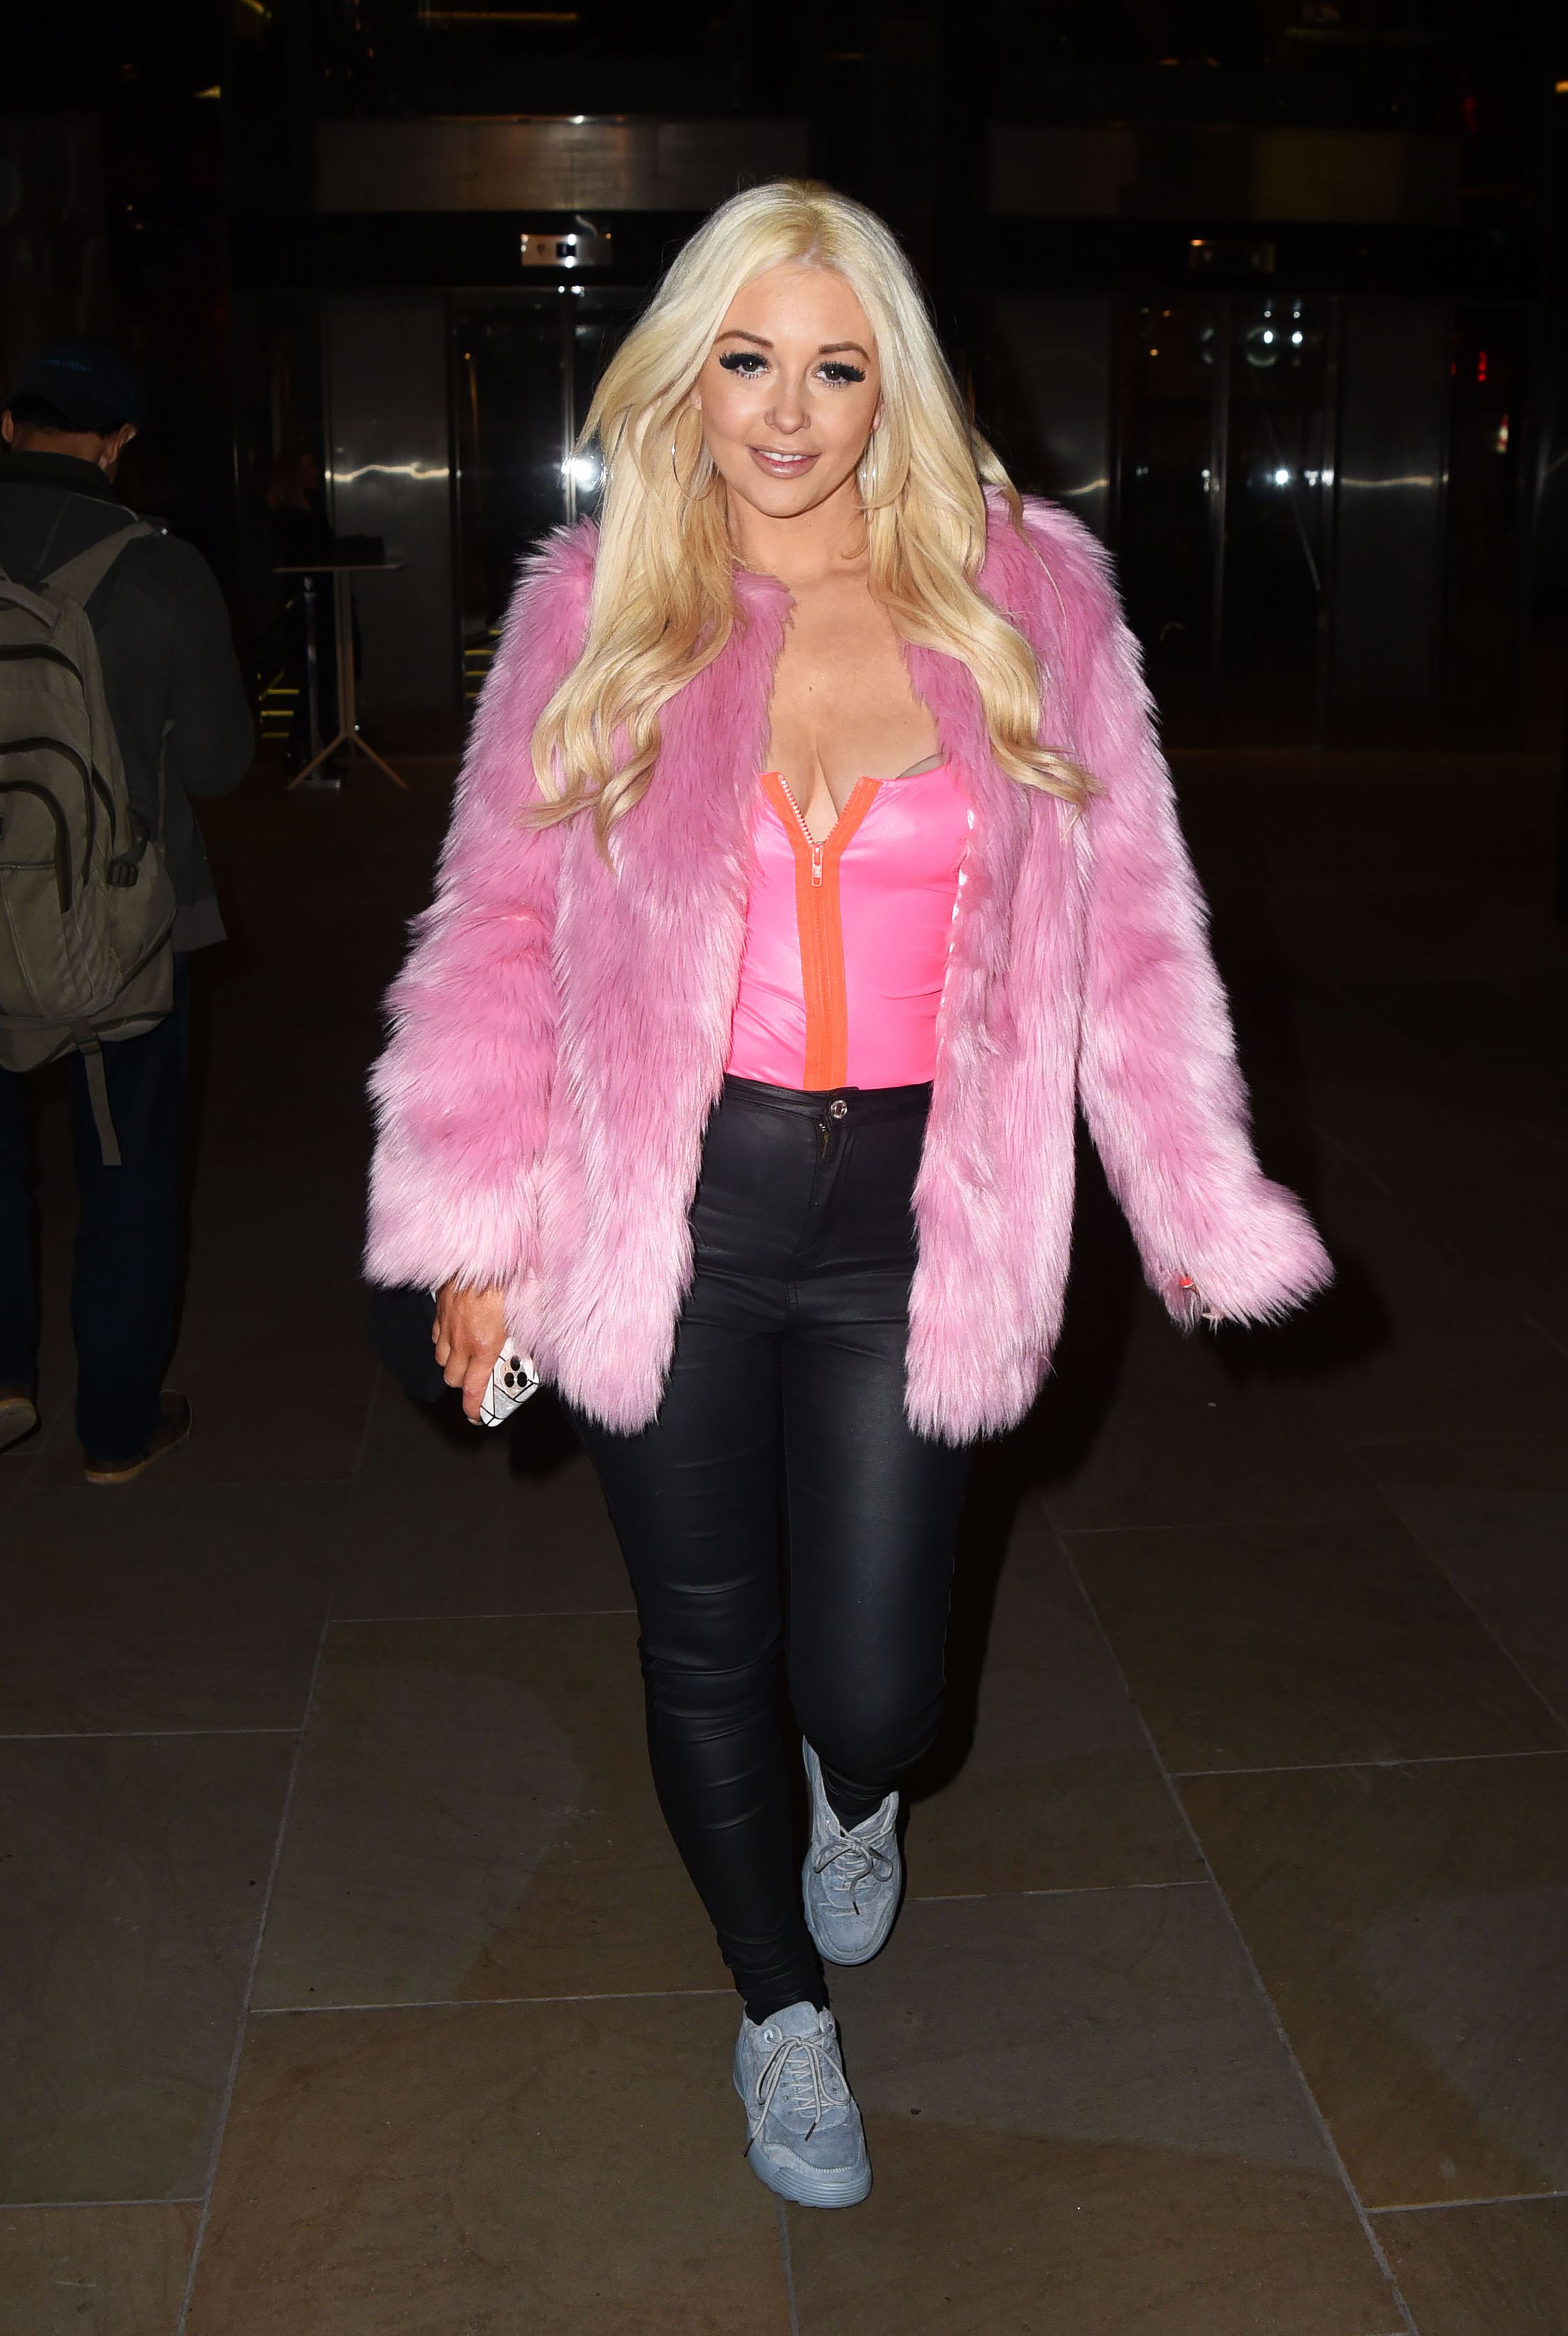 Jodie Weston attends The Skinny Tan: Choc Range launch party